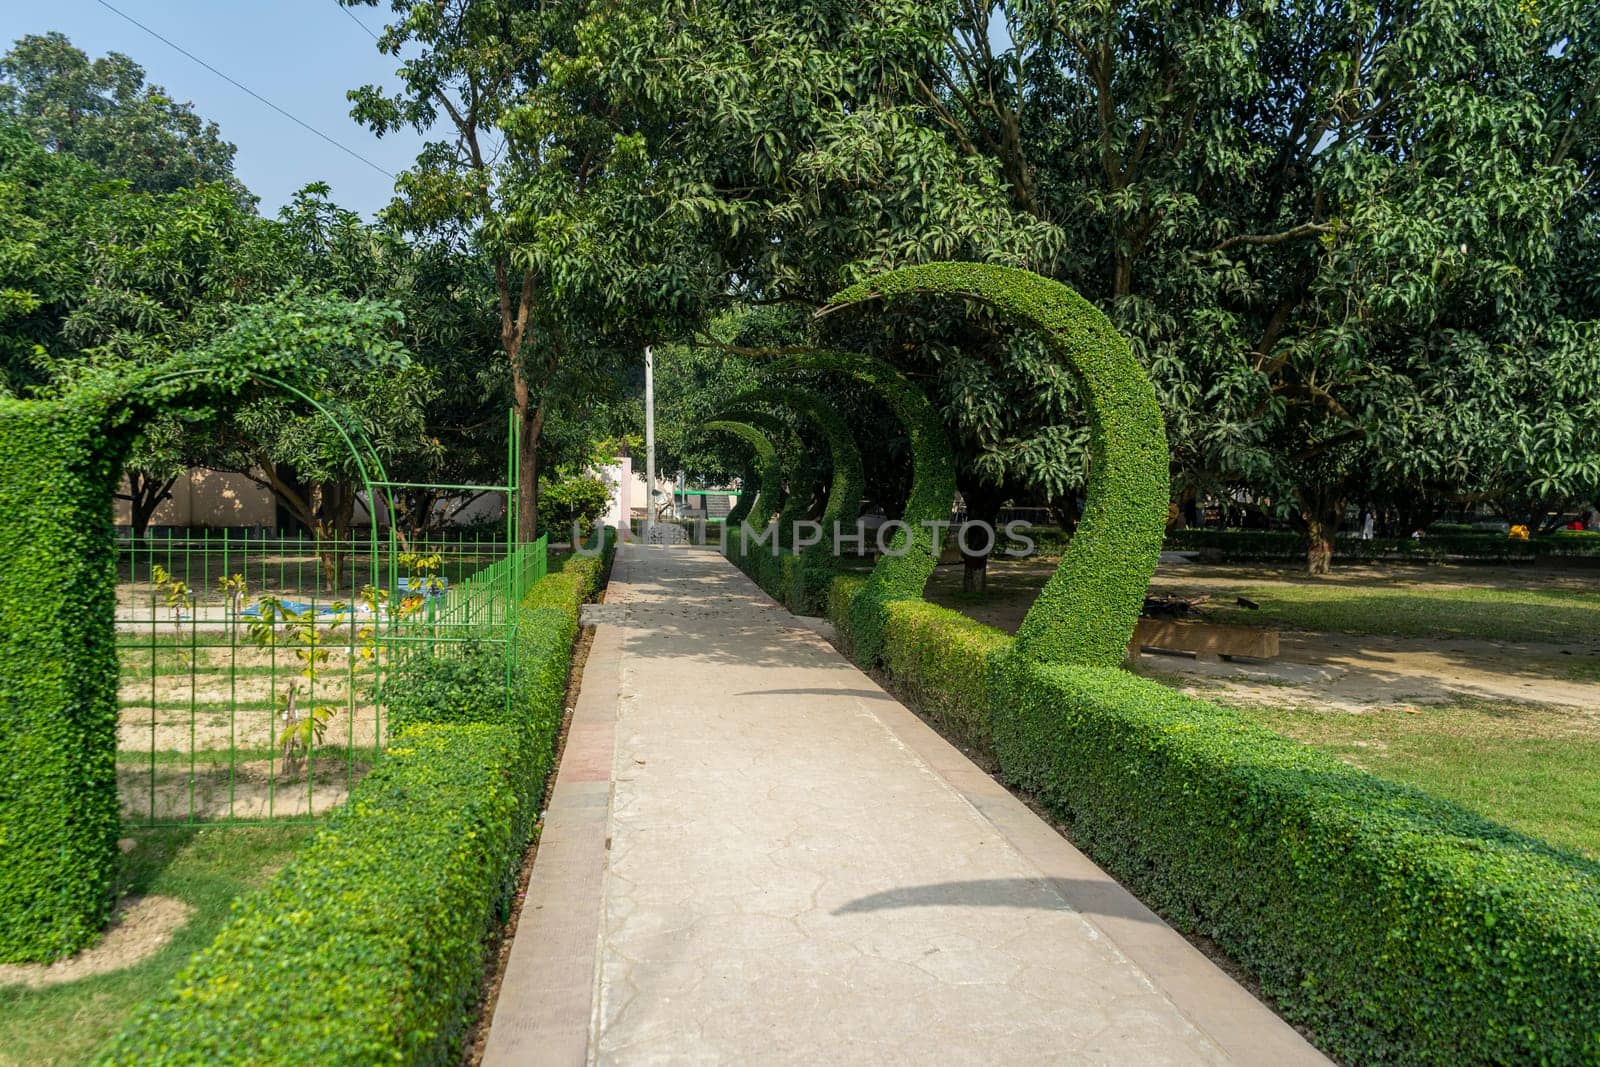 An alley in the park with decoratively trimmed bushes